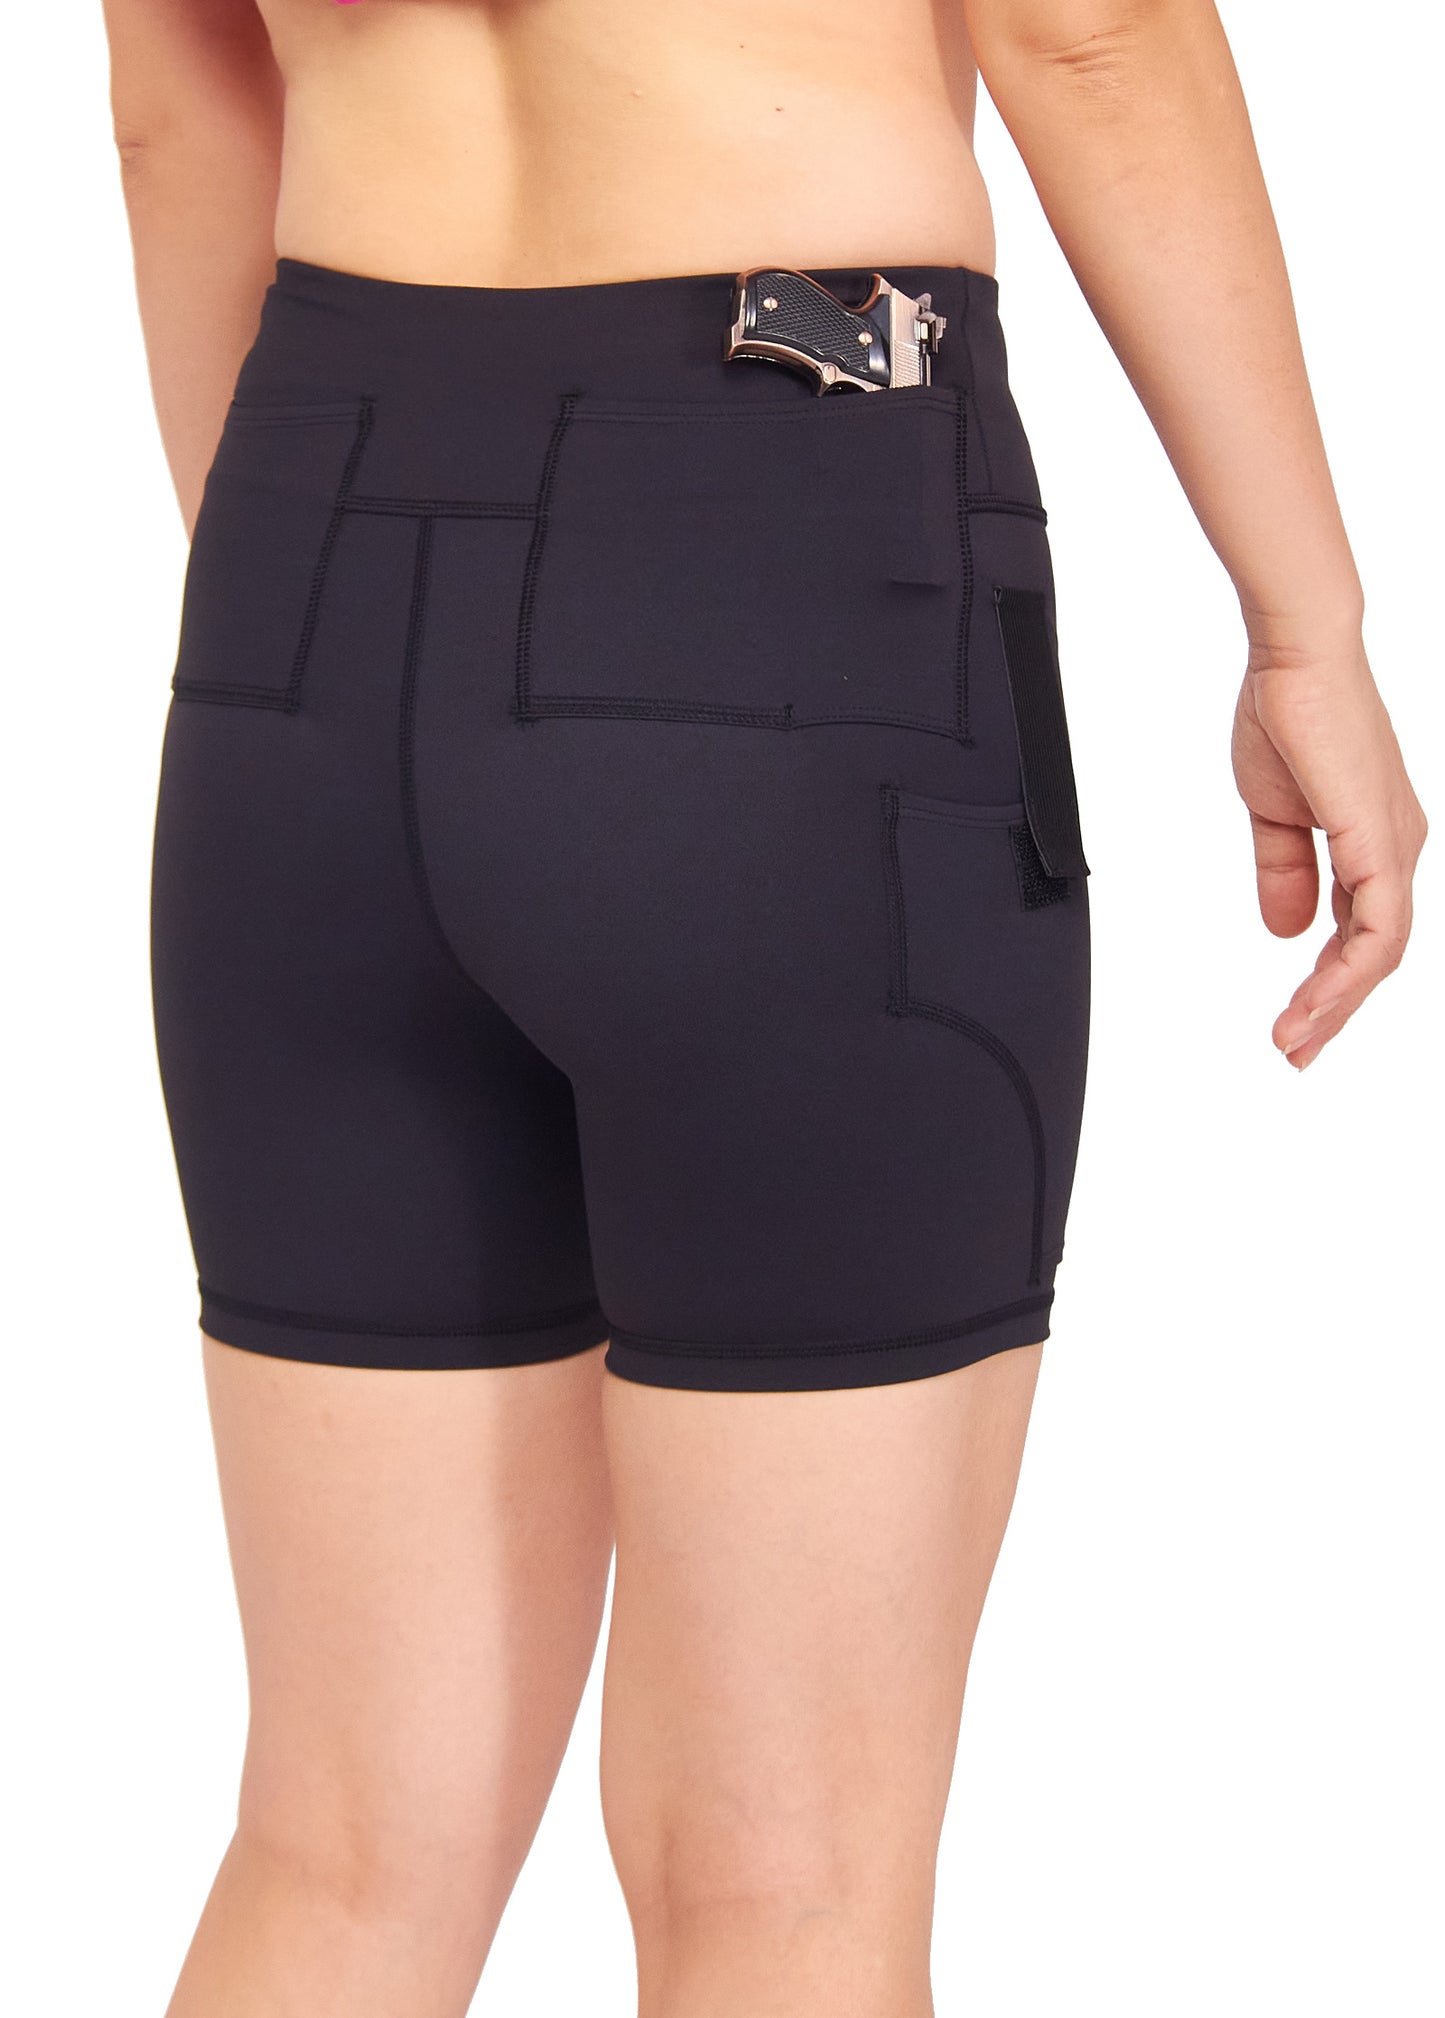 Graystone CCW Women's Two Pocket Holster Short with Outer Thigh Pocket Concealed Carry Compression Clothing Spandex